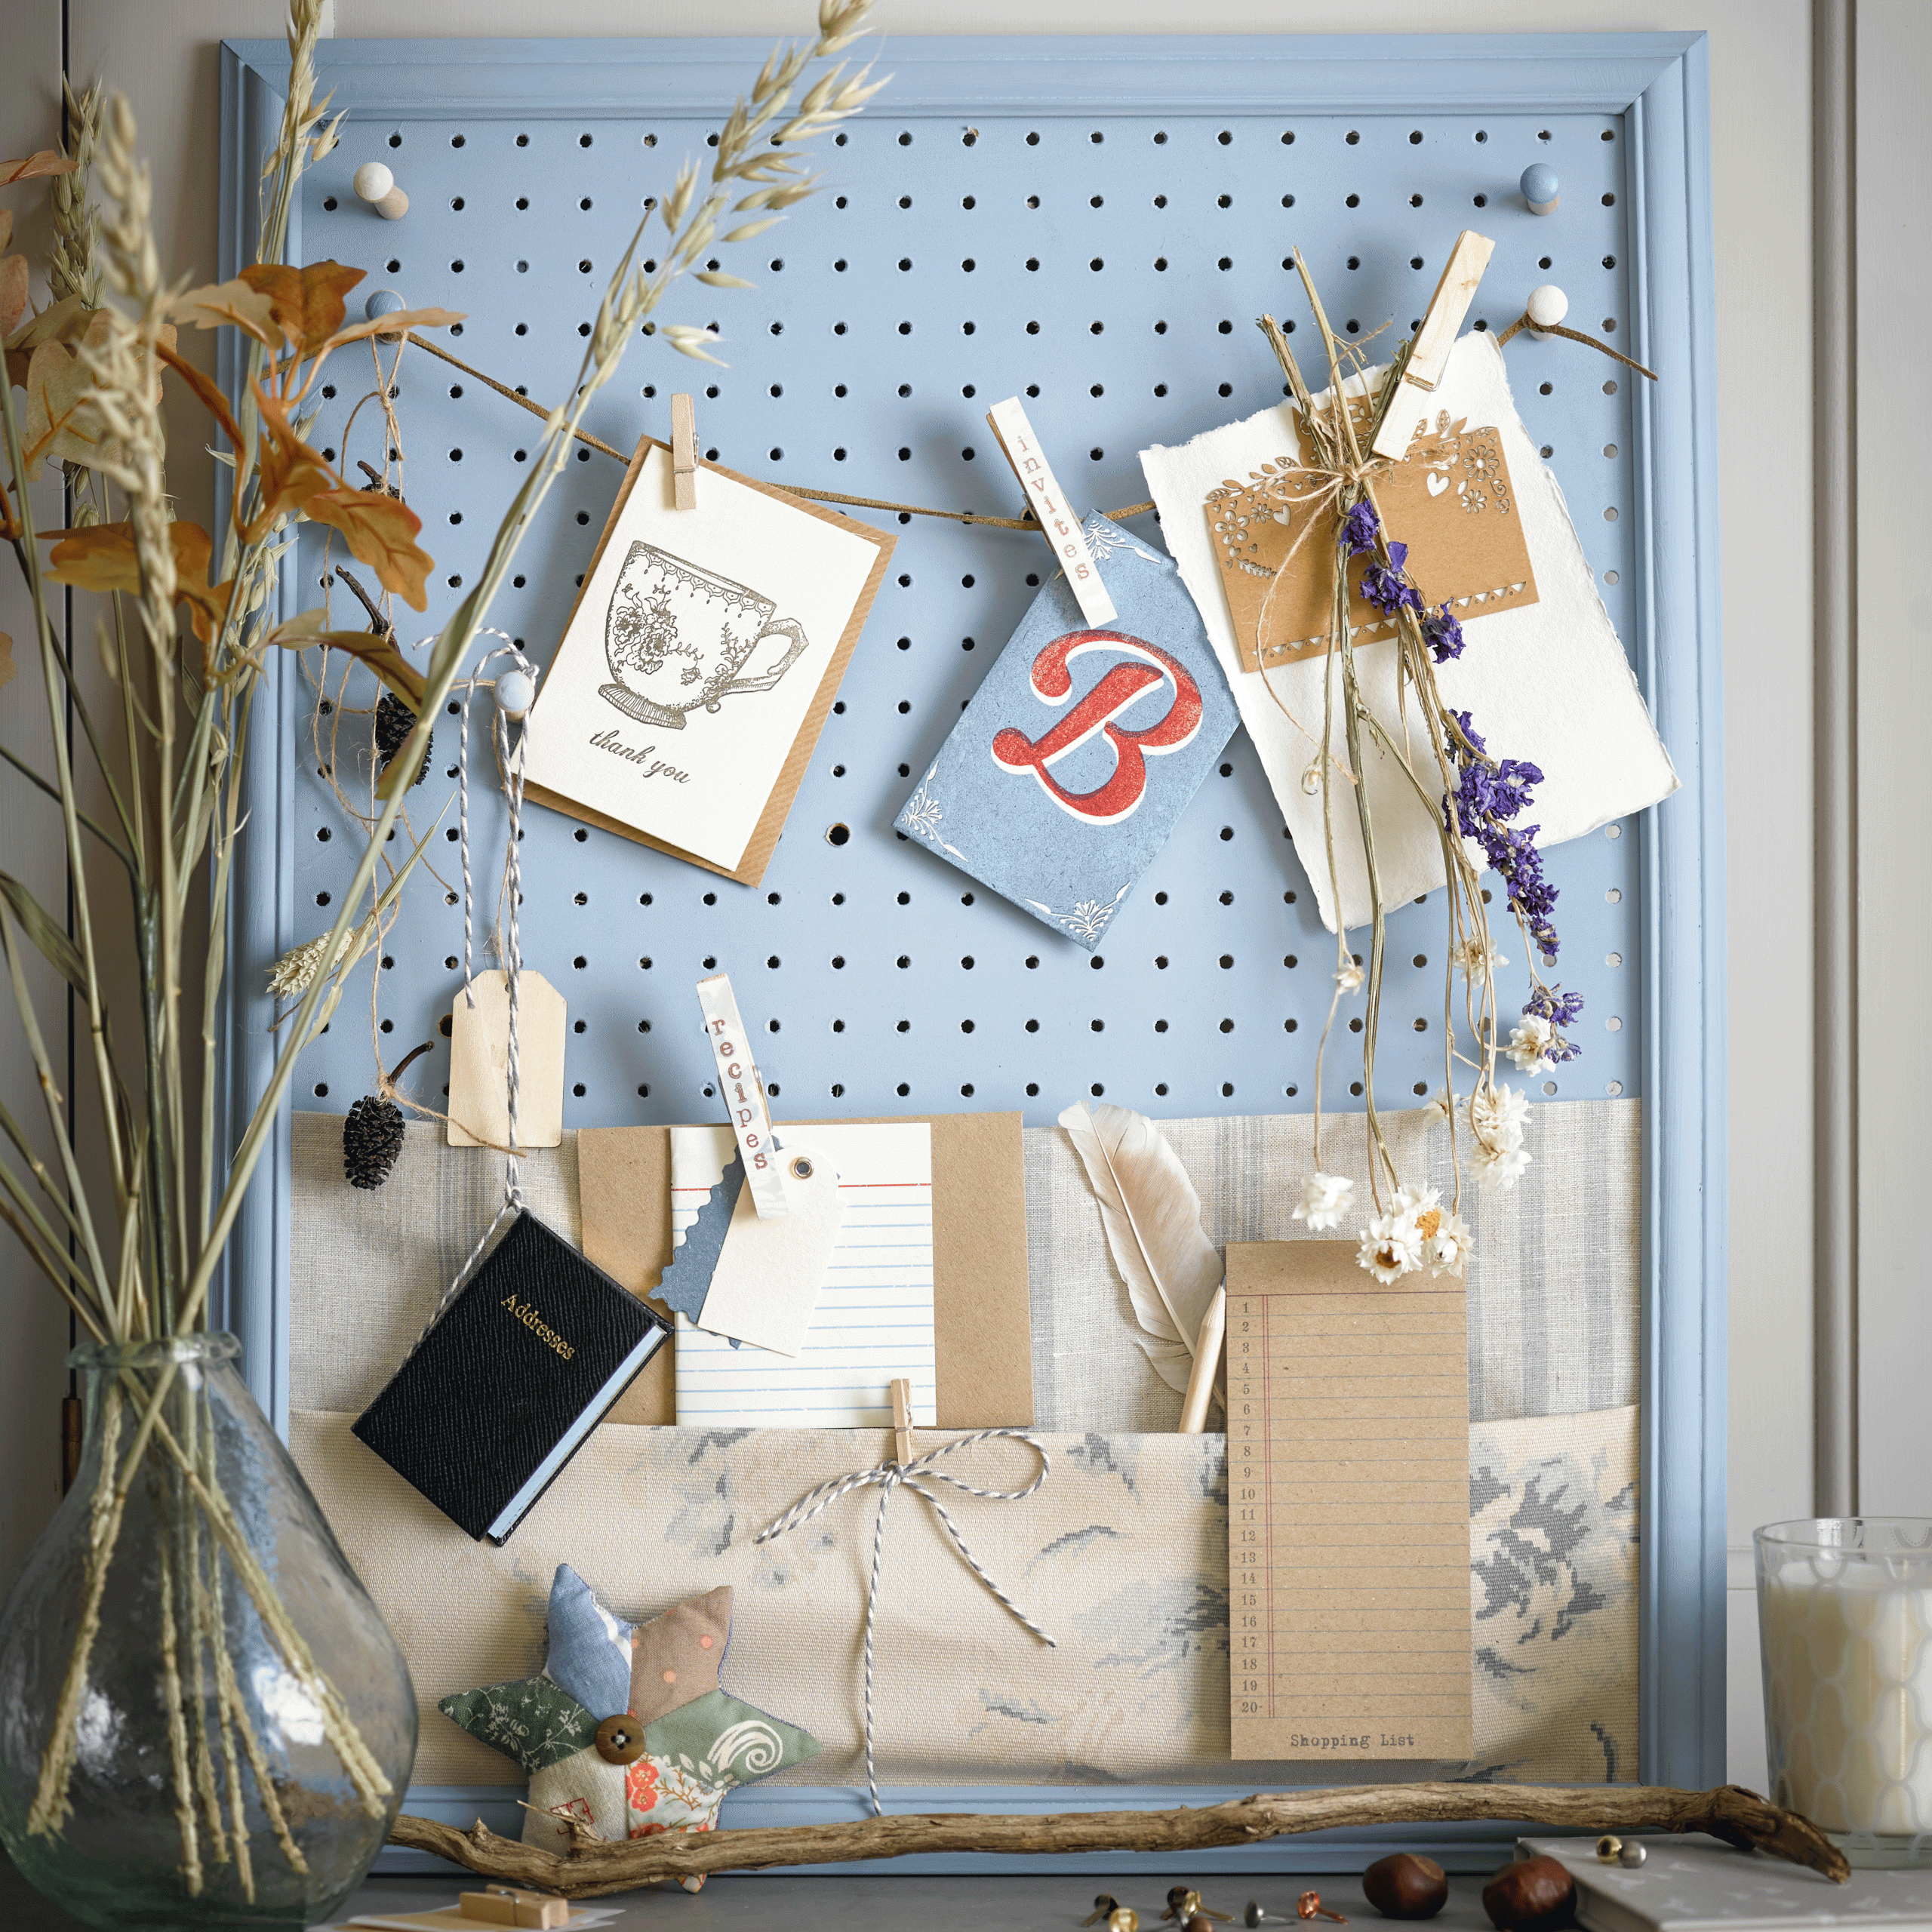 A blue peg board with assorted art and crafting materials attached to it.